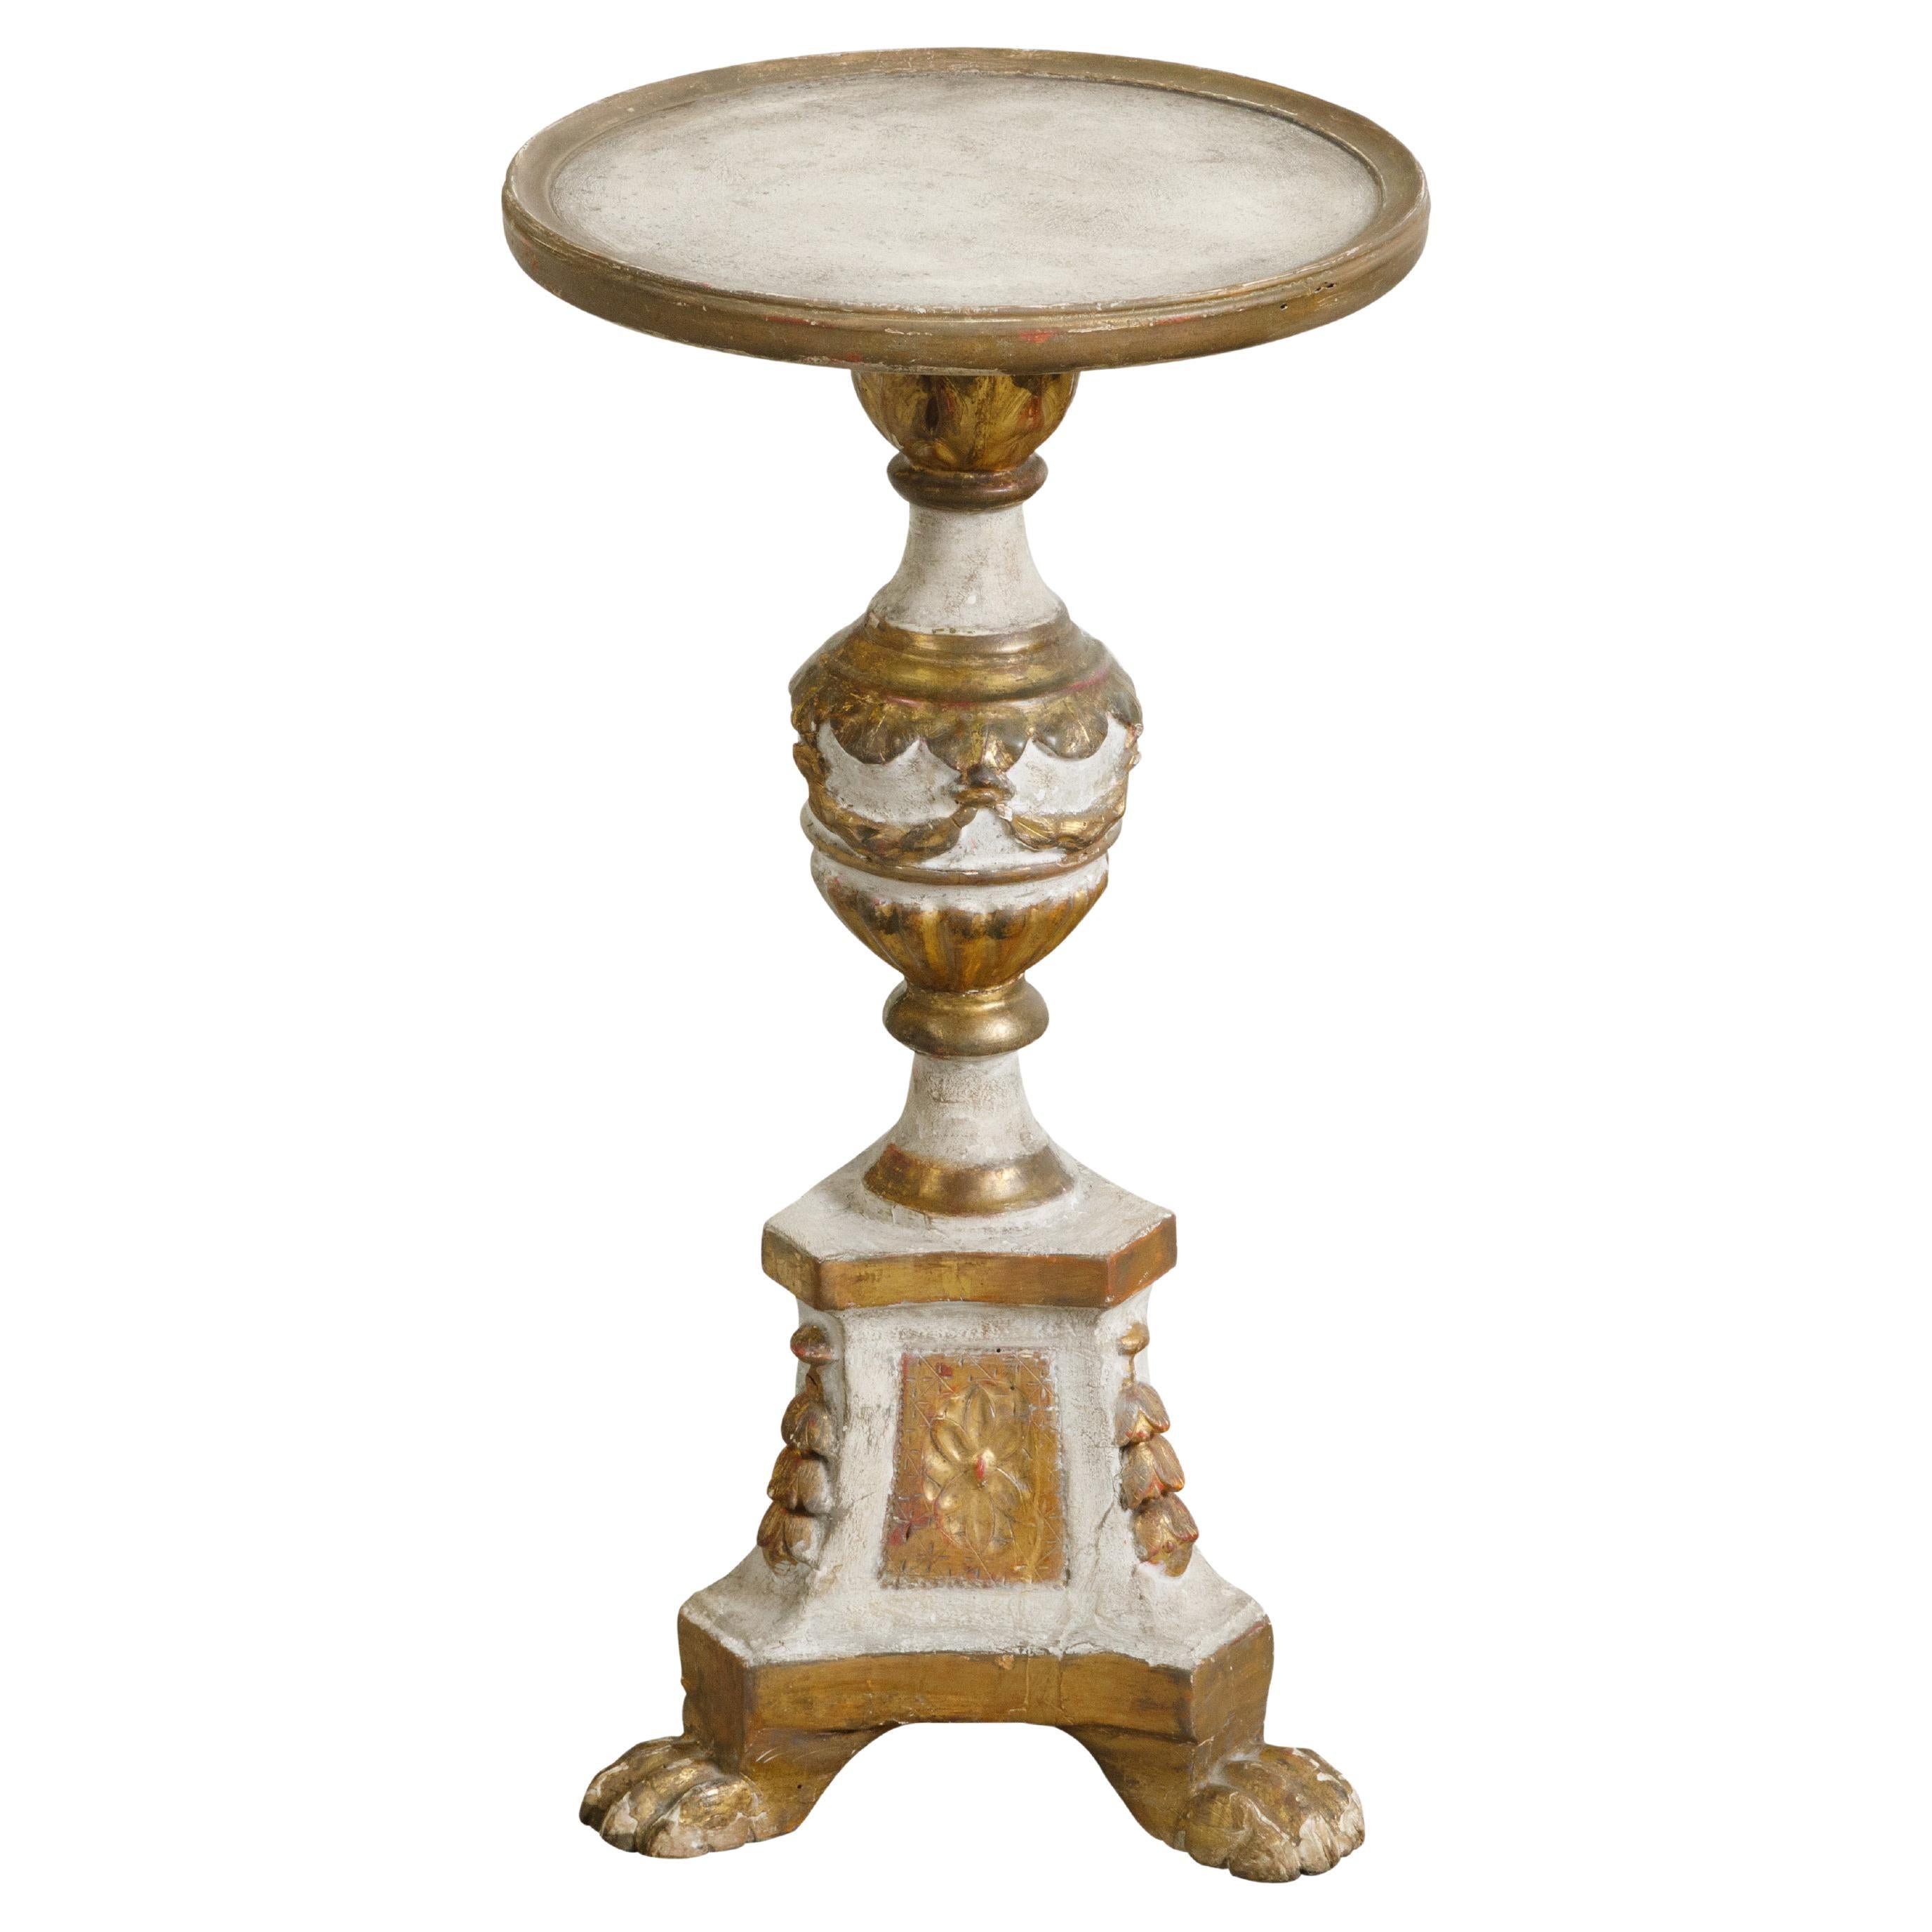 French 1820s Restauration Period Painted and Parcel Gilt Guéridon Table